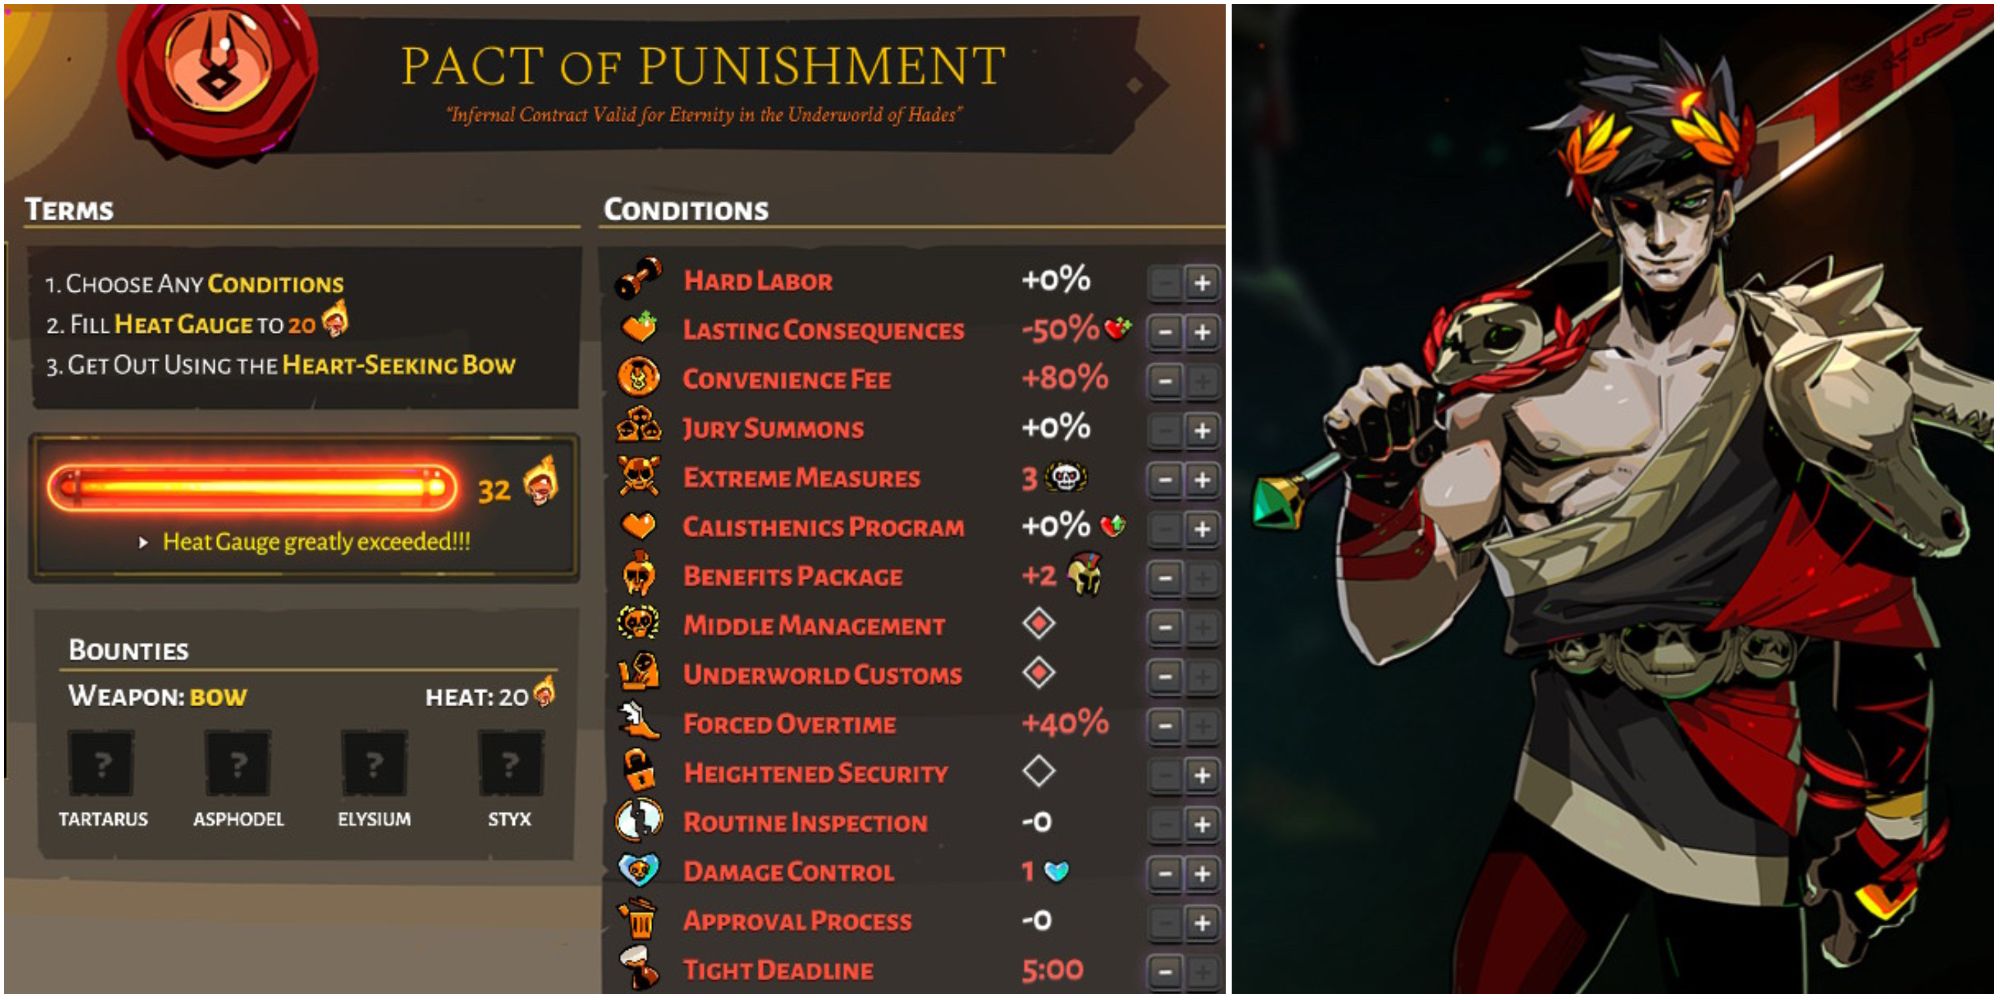 Split image Hades Pact of Punishment screen and Zagreus official artwork